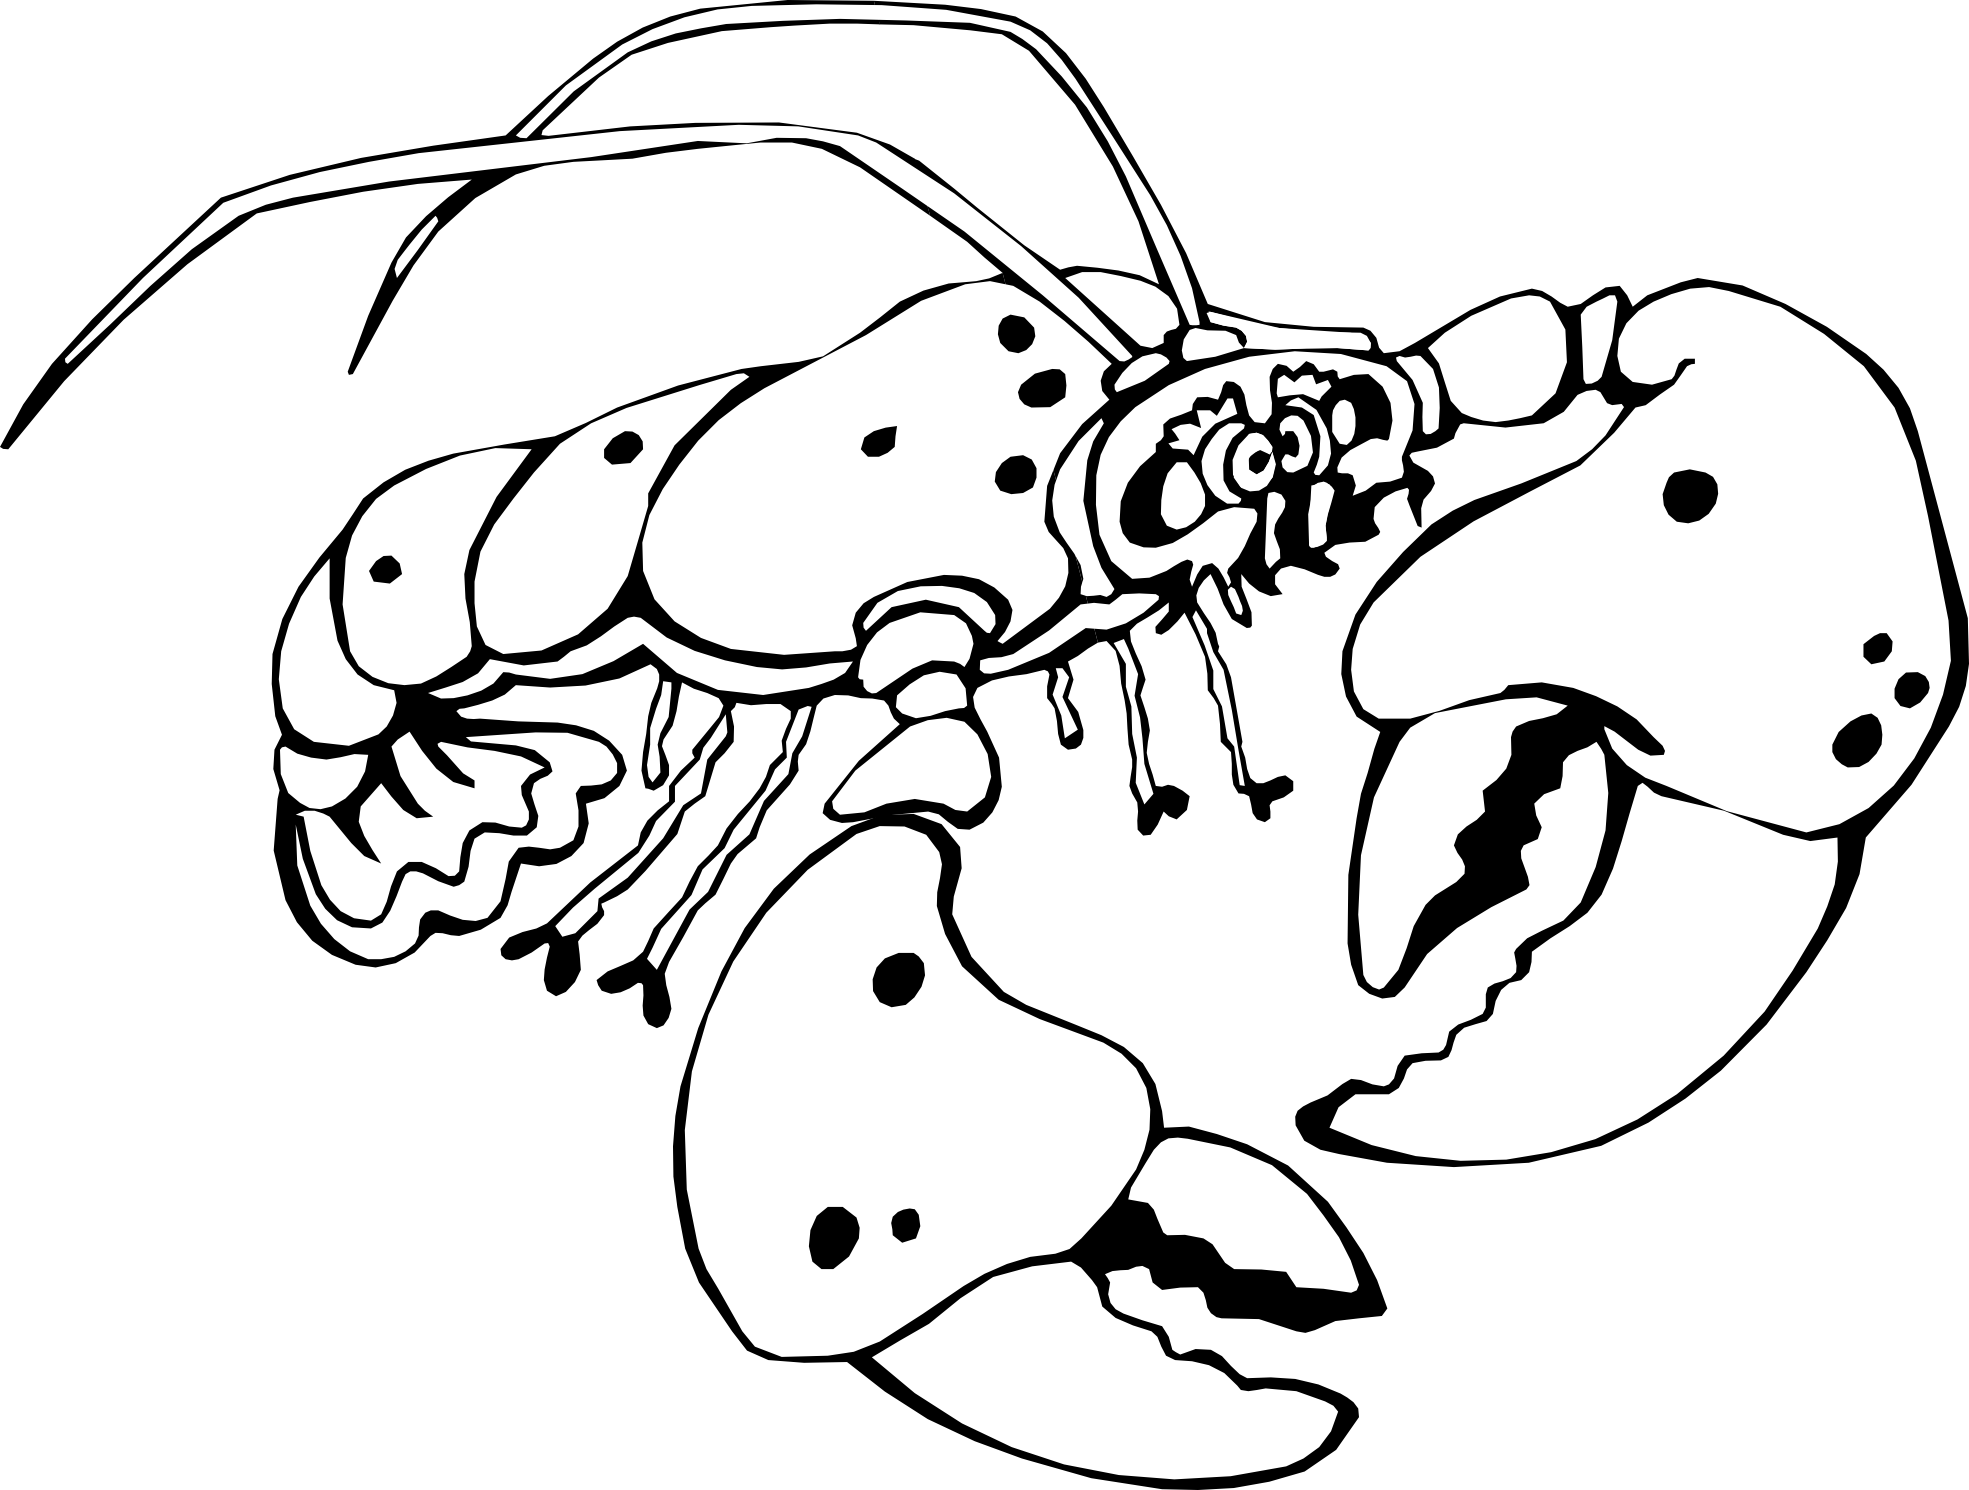 free-lobster-clipart-black-and-white-download-free-lobster-clipart